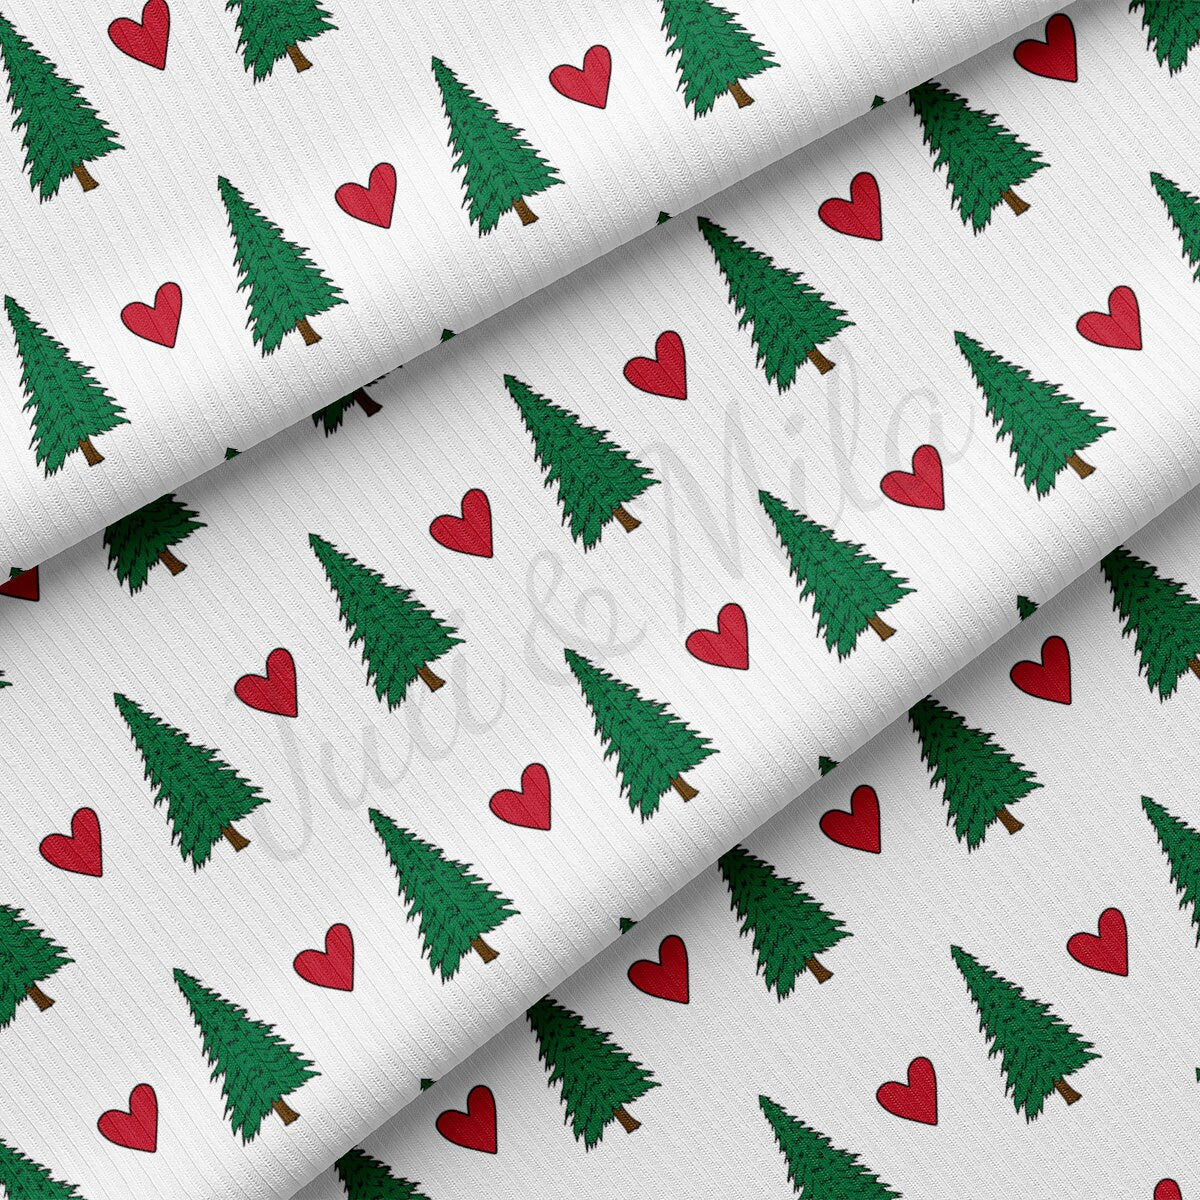 Christmas Rib Knit Fabric by the Yard Ribbed Jersey Stretchy Soft Polyester Stretch Fabric 1 Yard  RBK2169